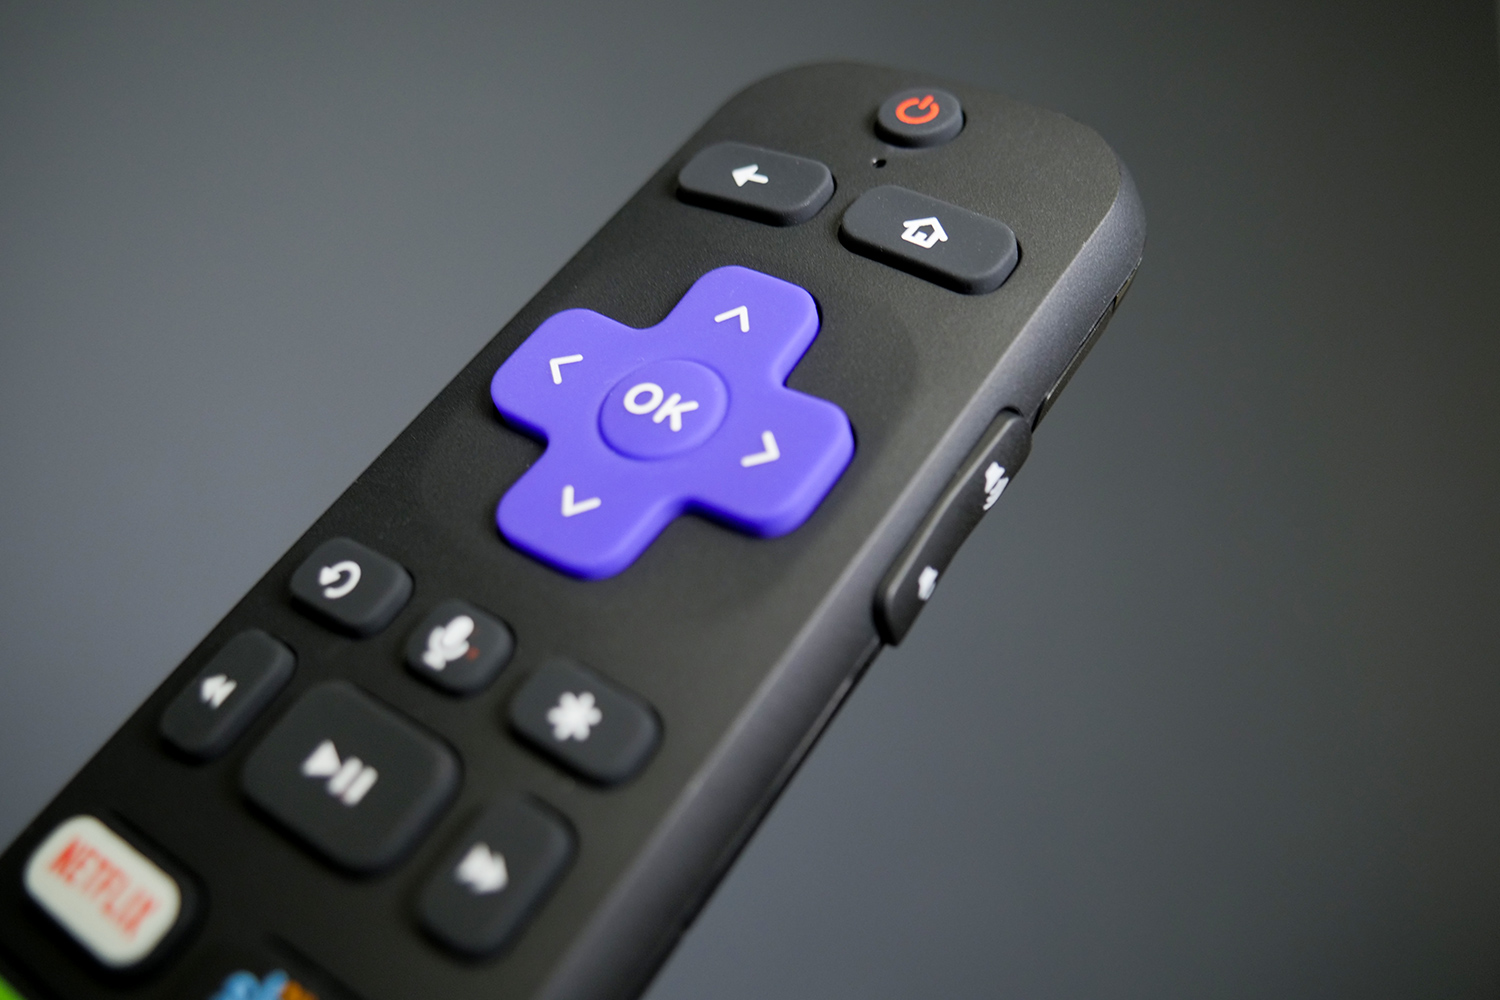 Roku may pull Fox channels just ahead of the Super Bowl